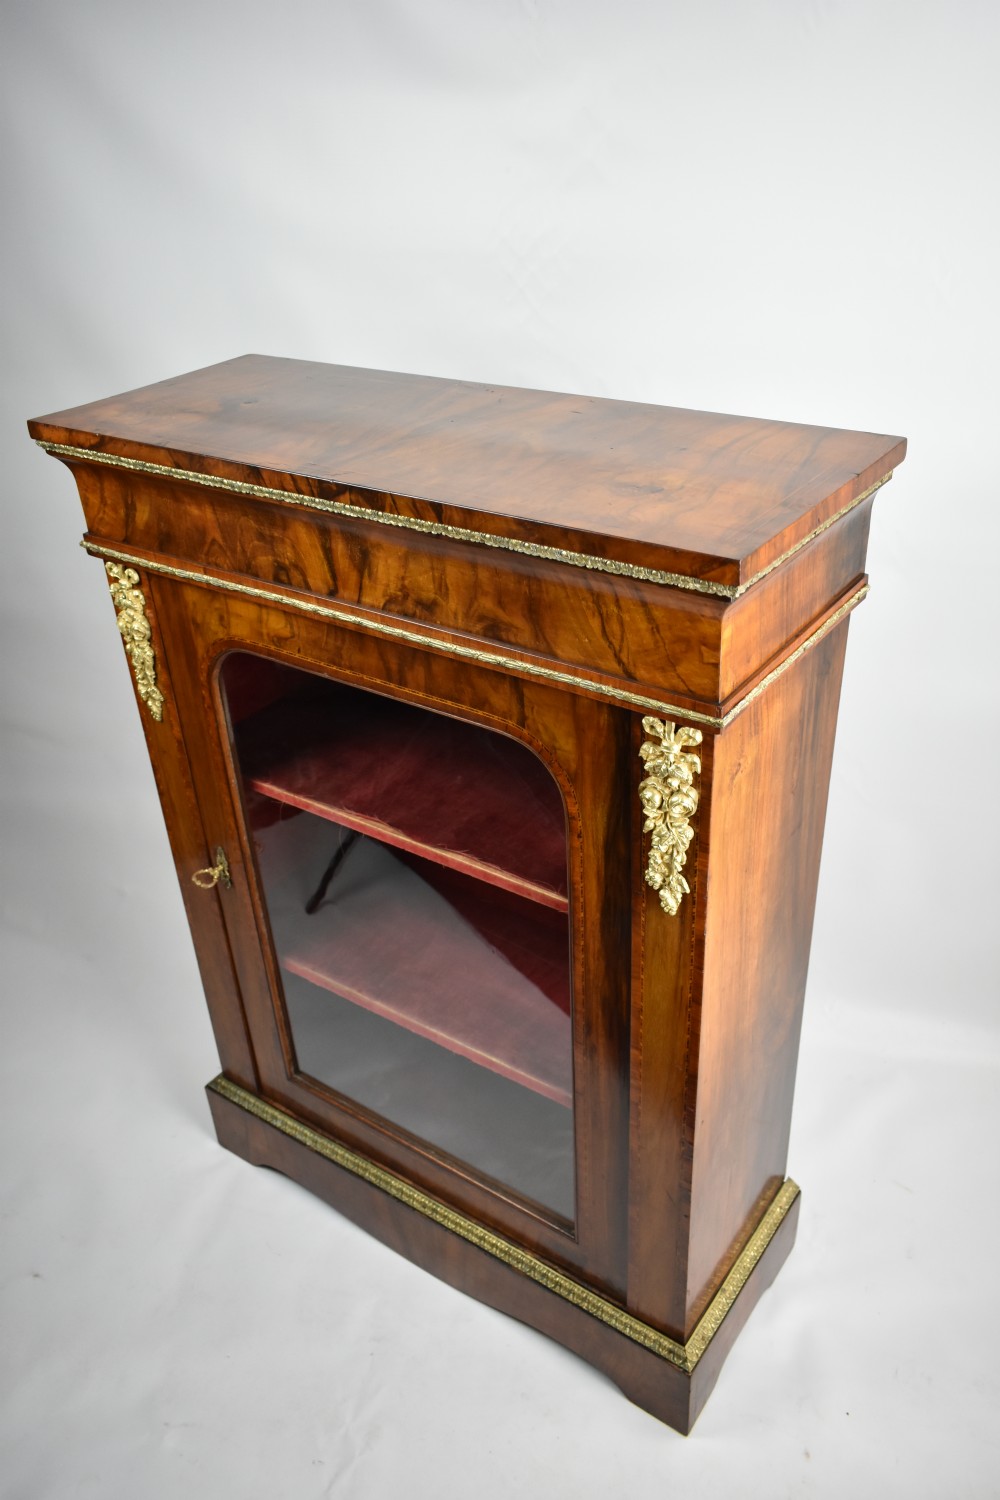 a mid victorian figured walnut and tulipwood banded pier cabinet with ormolu mounts